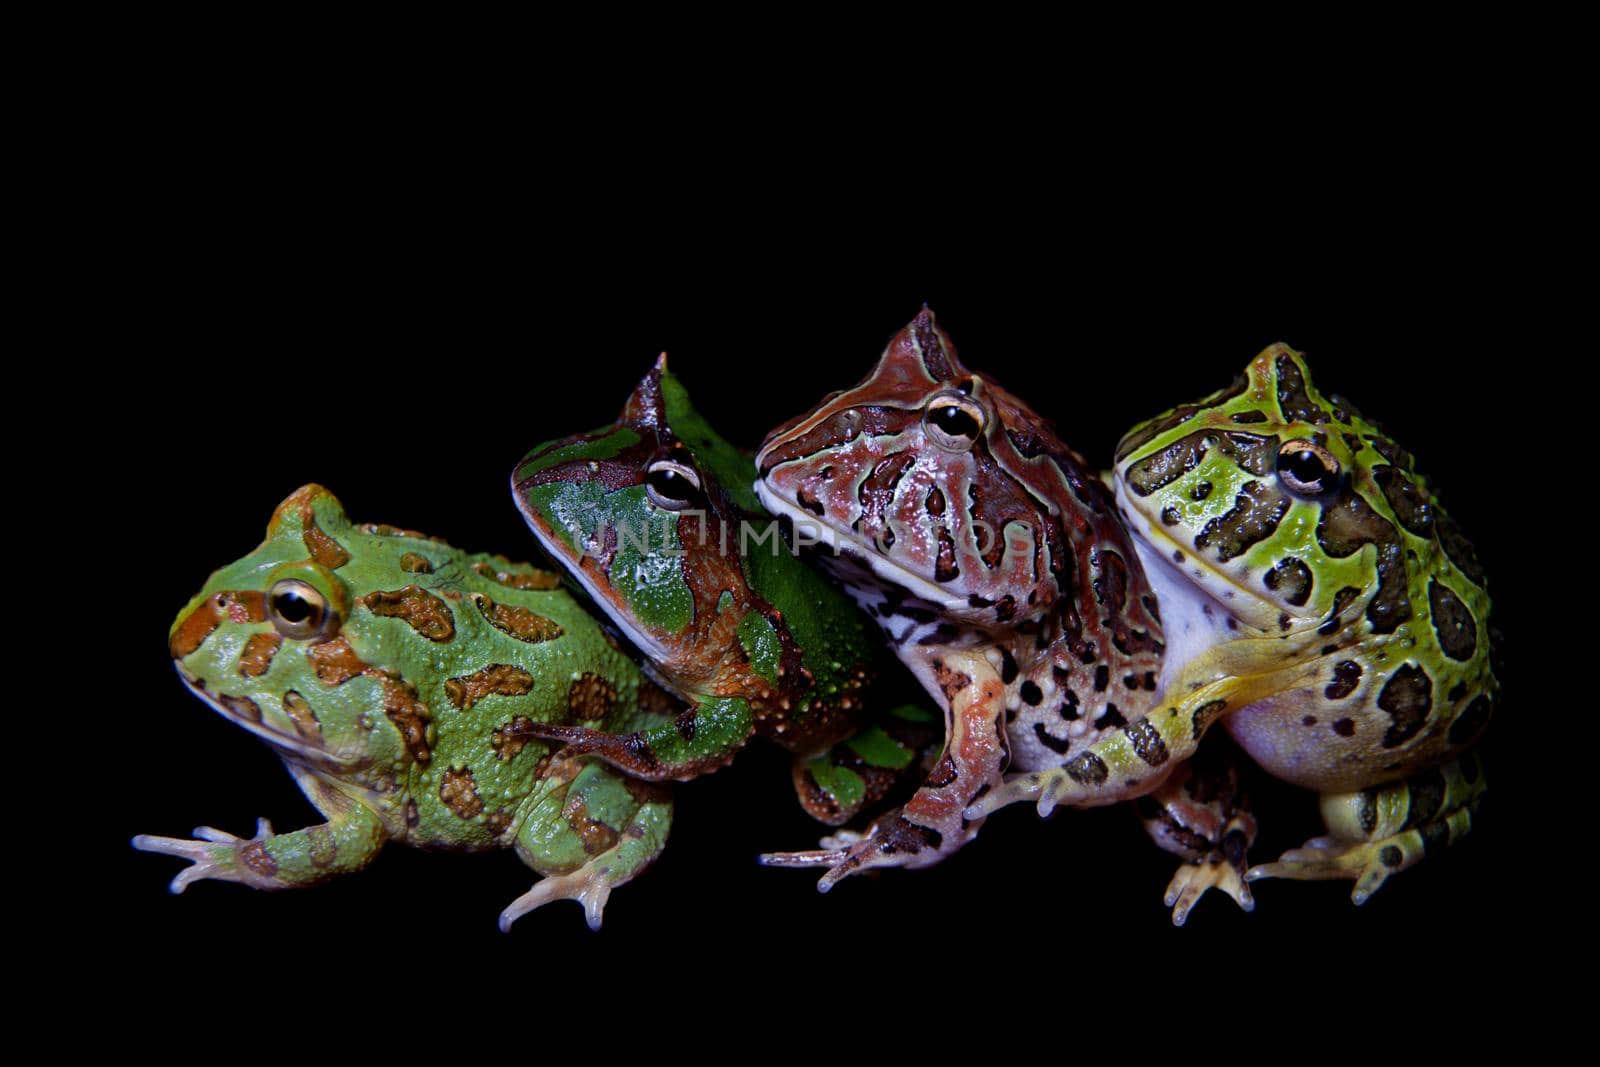 The pacman frogs isolated on black by RosaJay